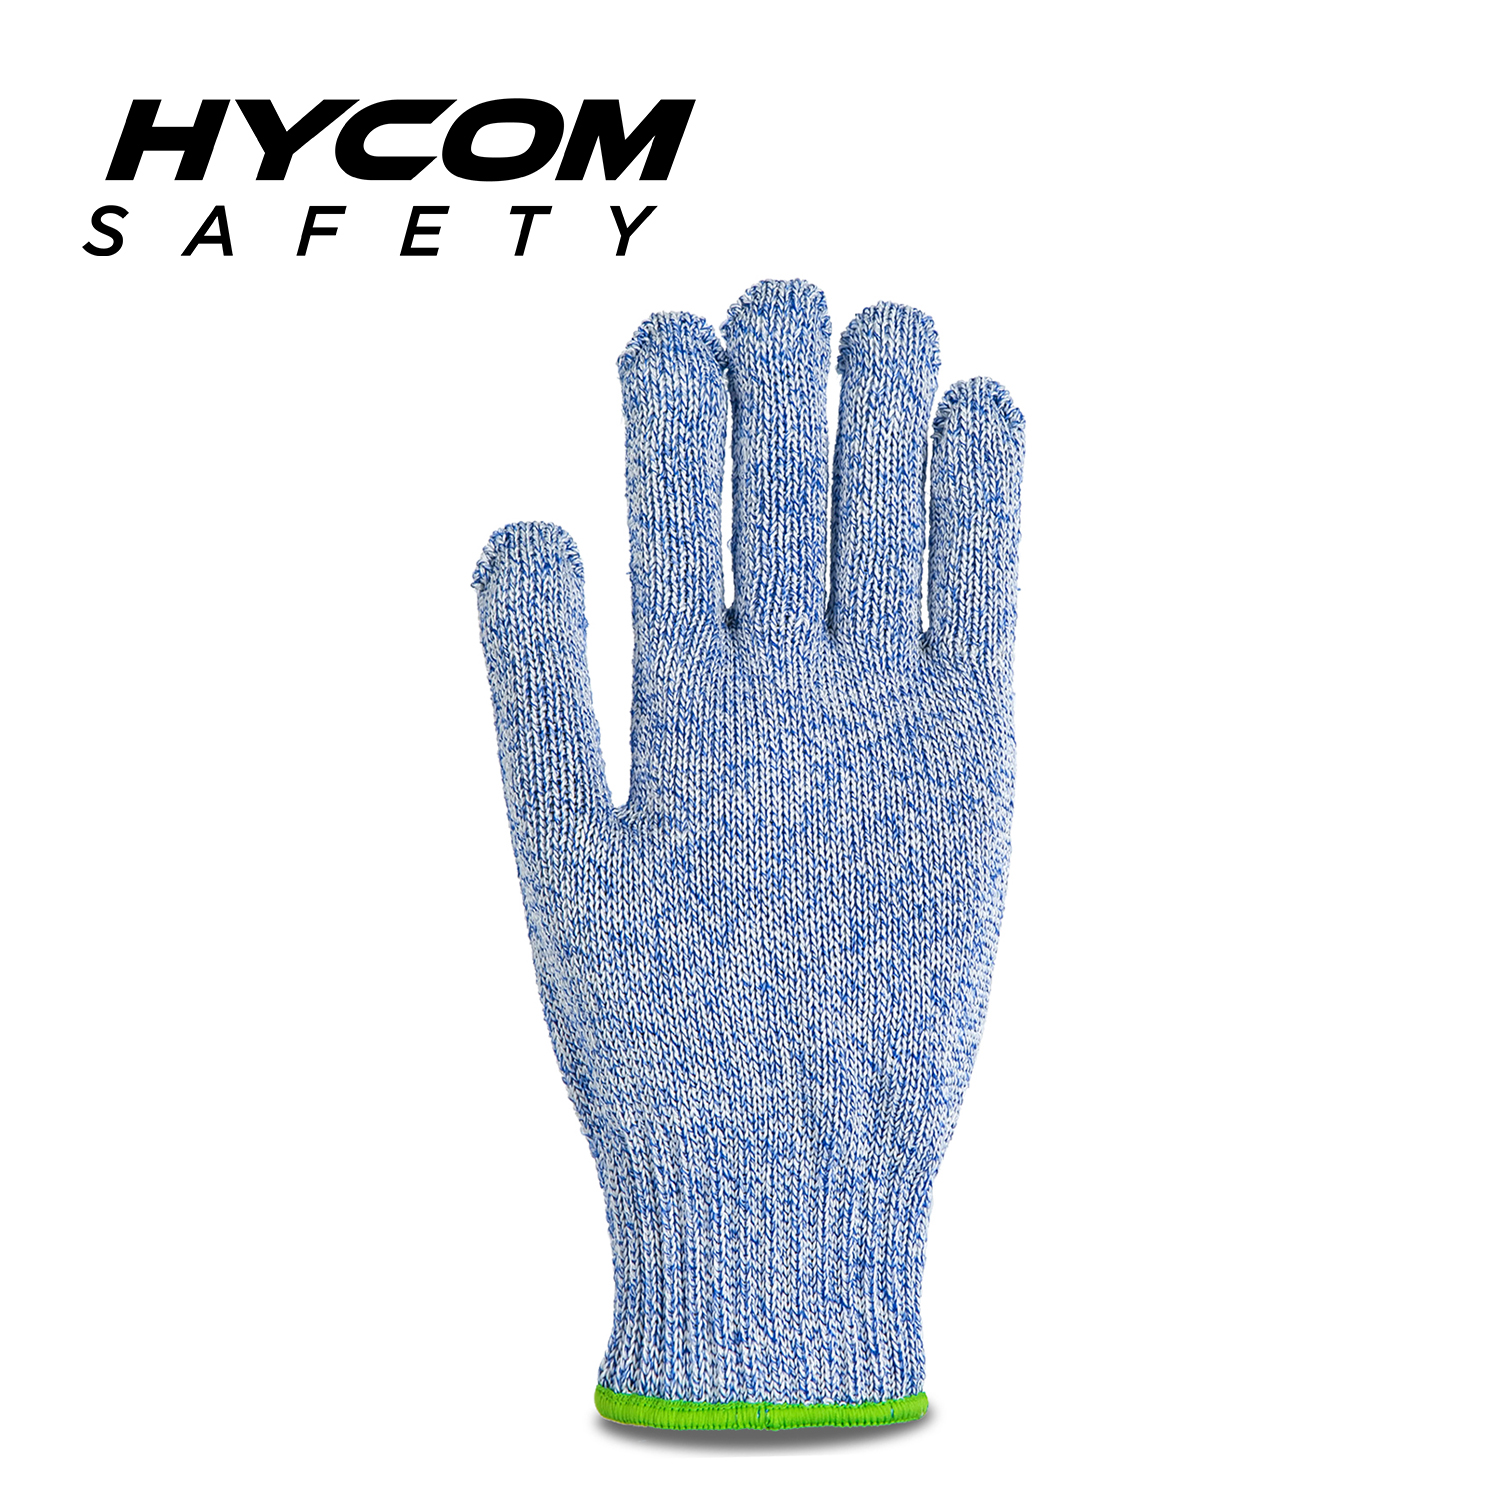 HYCOM 10G ANSI 7 HPPE Cut Resistant Glove FDA Food Contact Directly Butcher Glove